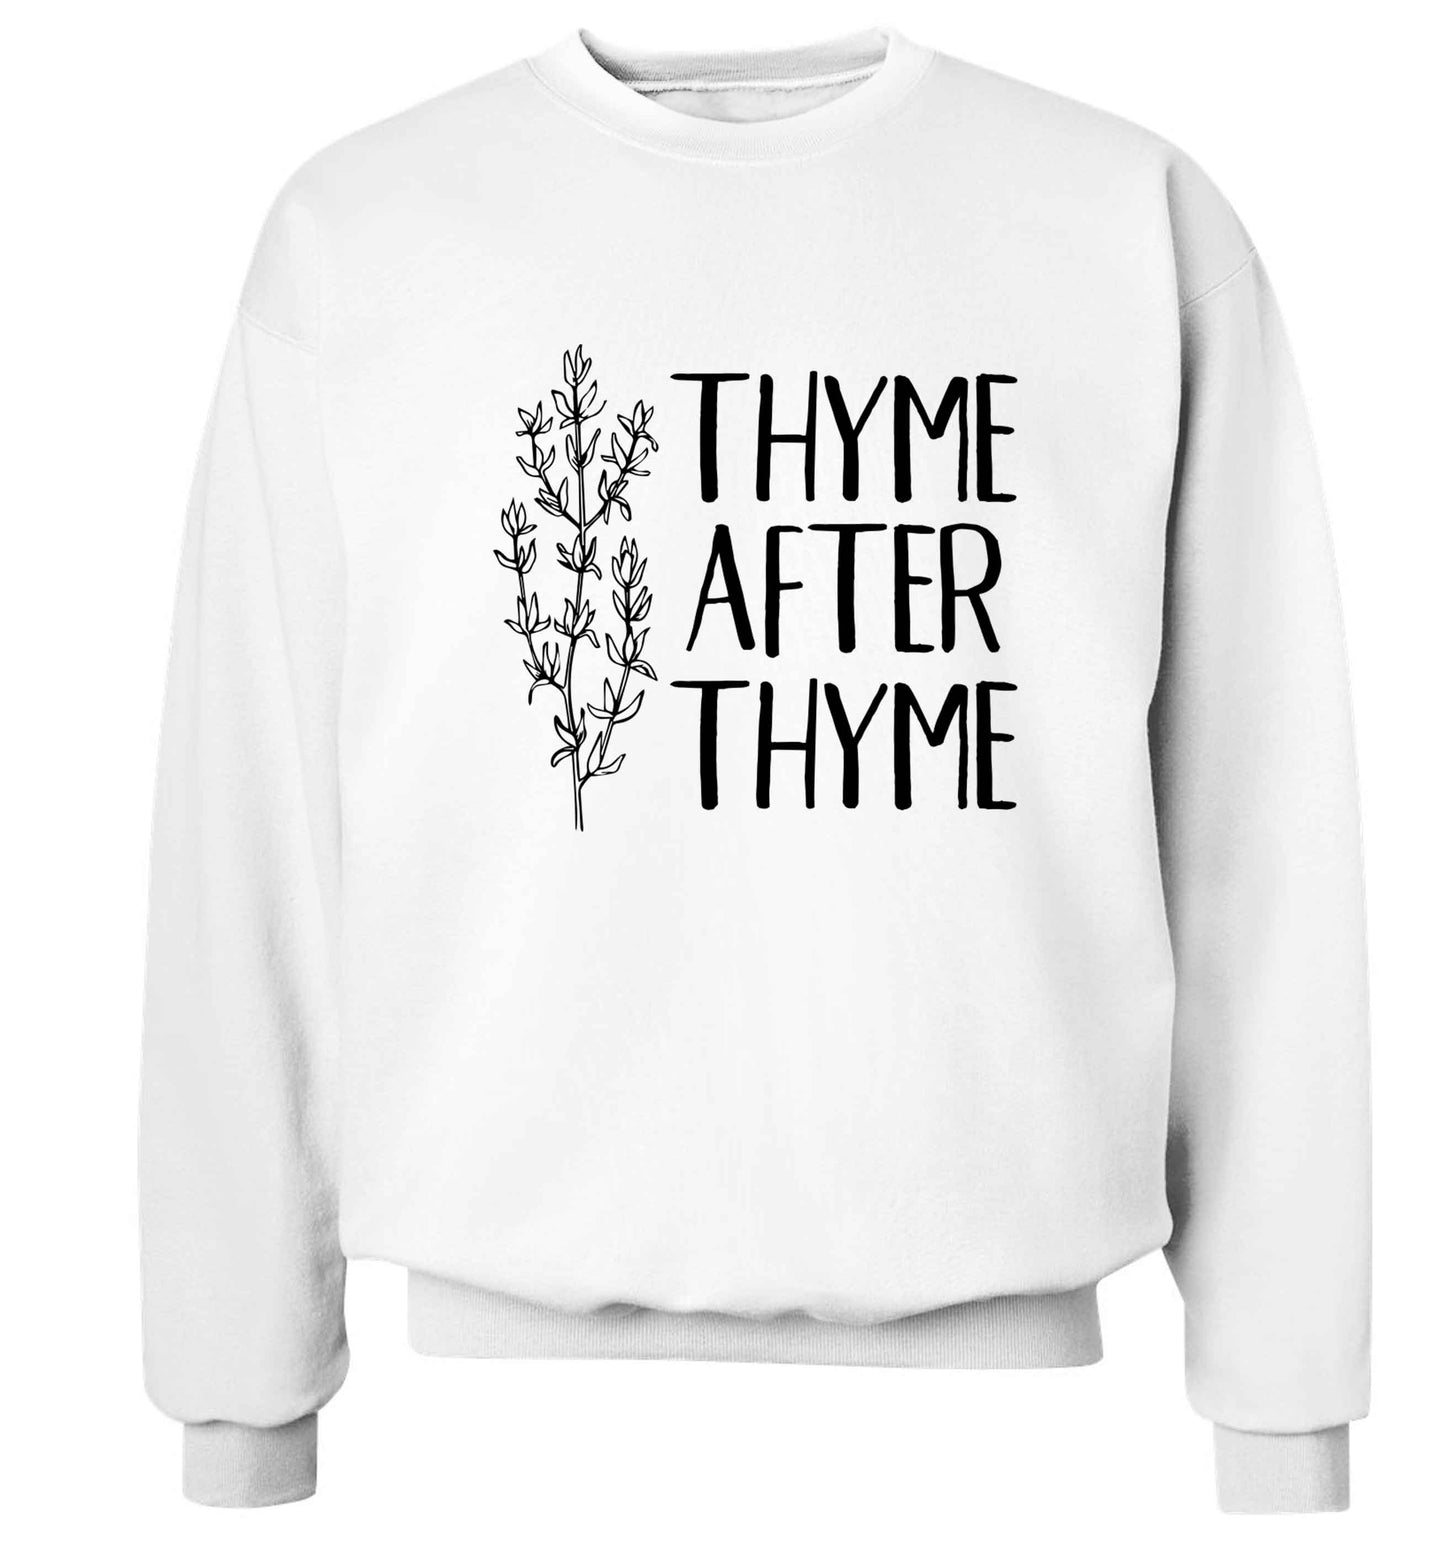 Thyme after thyme Adult's unisex white Sweater 2XL